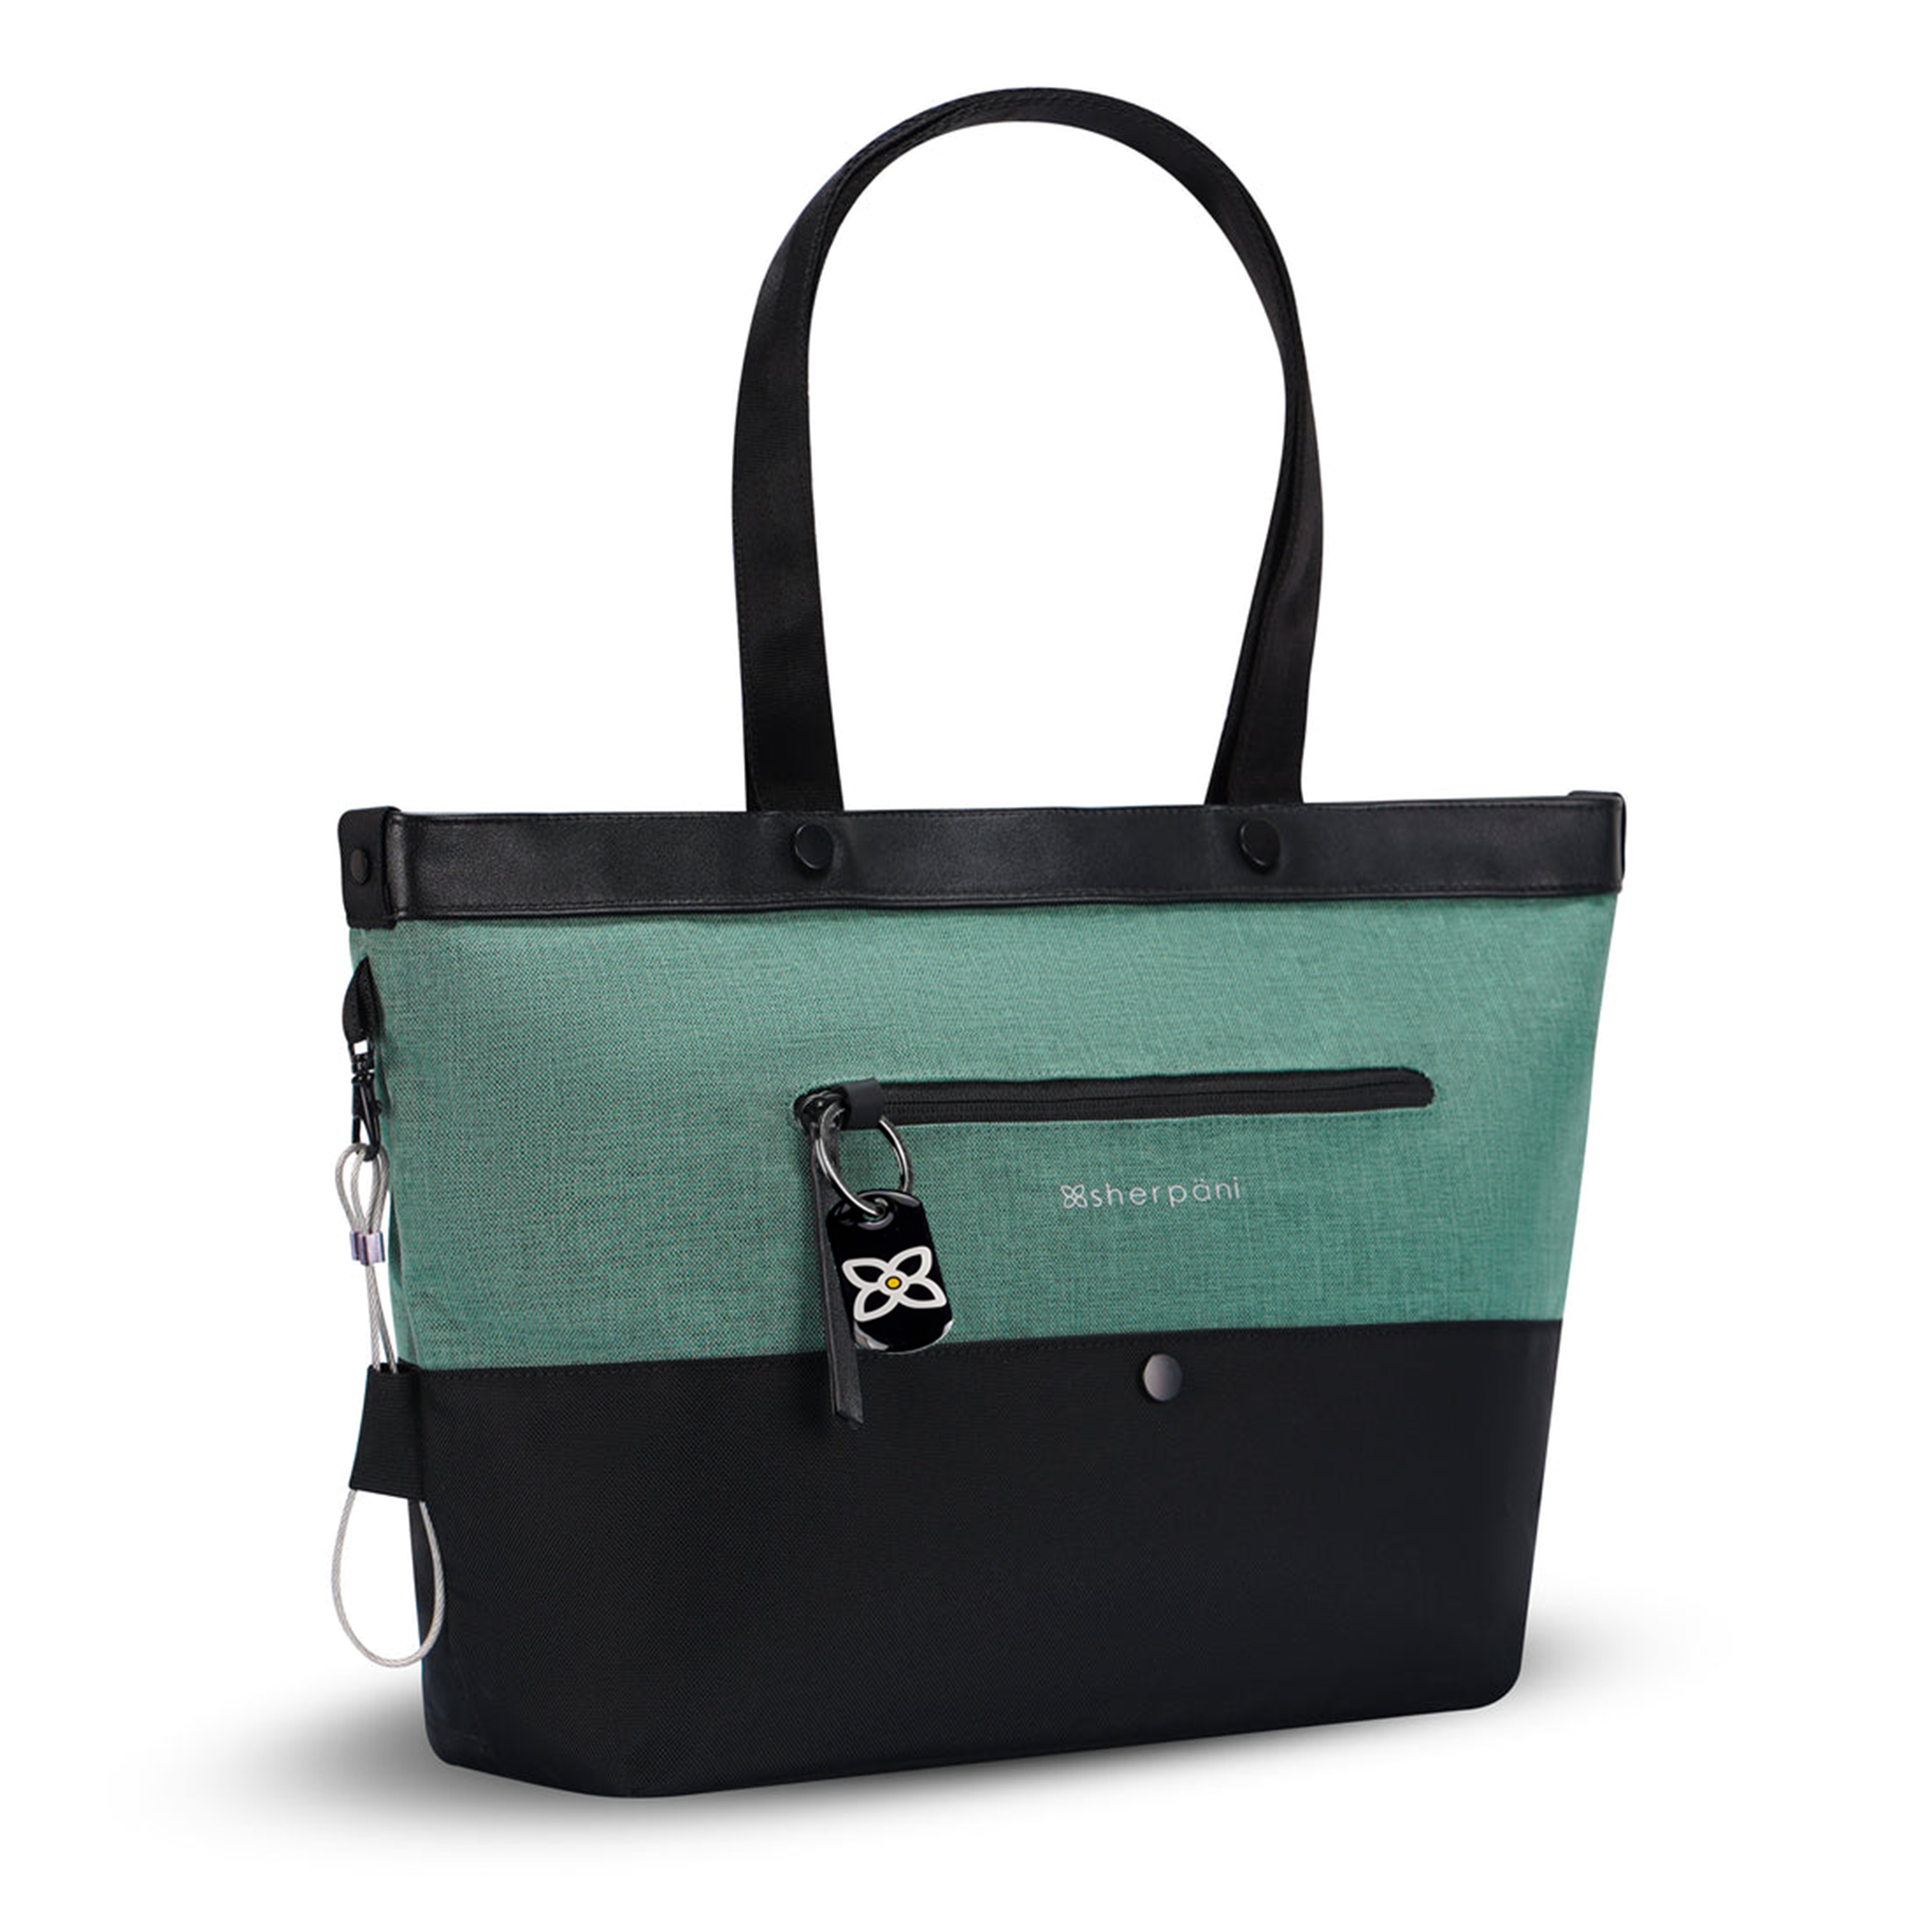 Angled front view of Sherpani's Anti-Theft tote, the Cali AT in Teal, with vegan leather accents in black. There is an external compartment on the front of the bag with a locking zipper and ReturnMe tag. A chair loop lock is clipped to the side of the bag and is held in place by an elastic tab. 